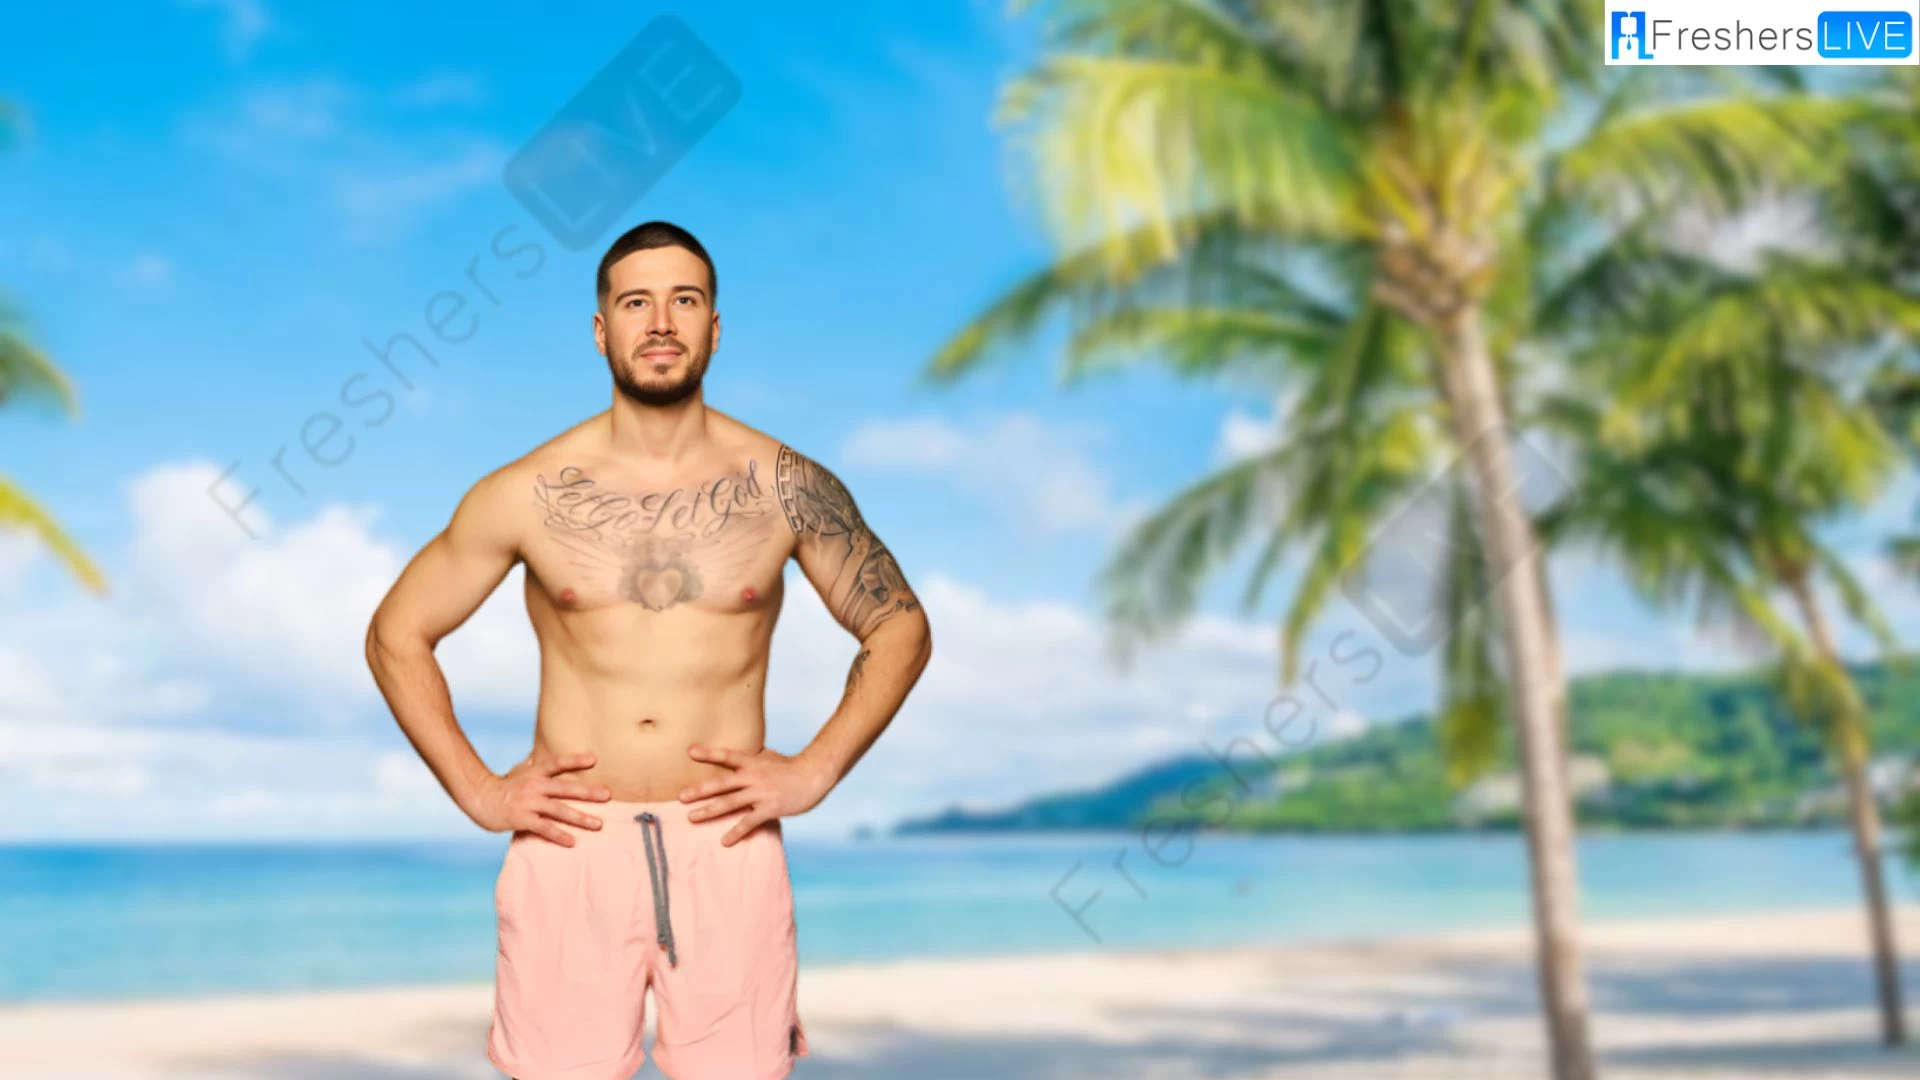 All Star Shore Season 2 Episode 1 Release Date and Time, Countdown, When is it Coming Out?